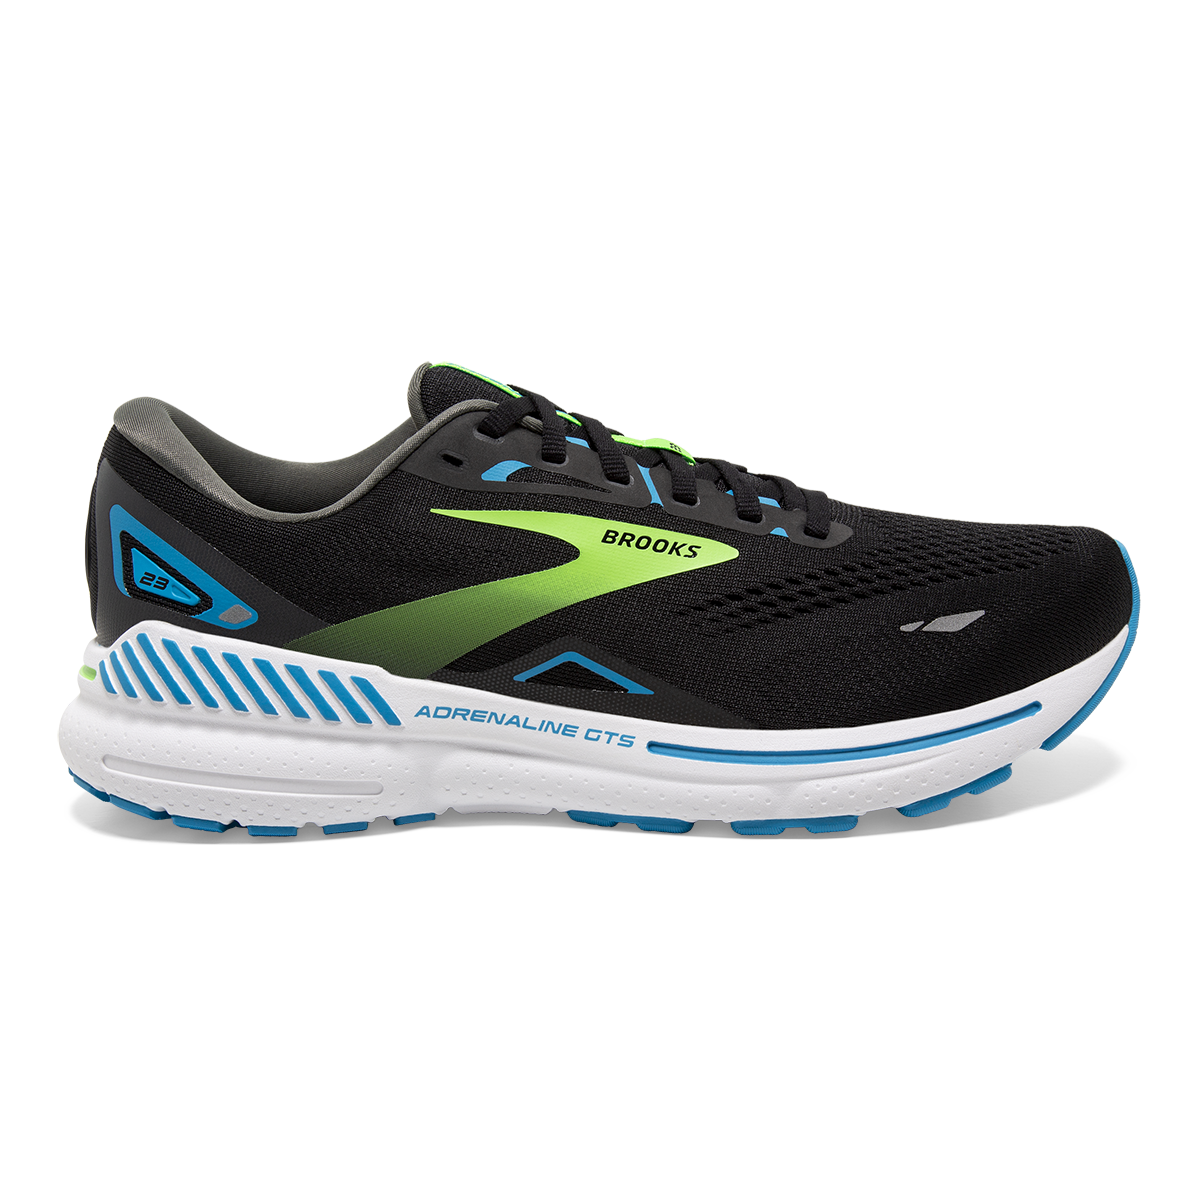 Lateral view of the Men's Adrenaline GTS 23 by Brook's in the color Black/Hawaiian Ocean/Green